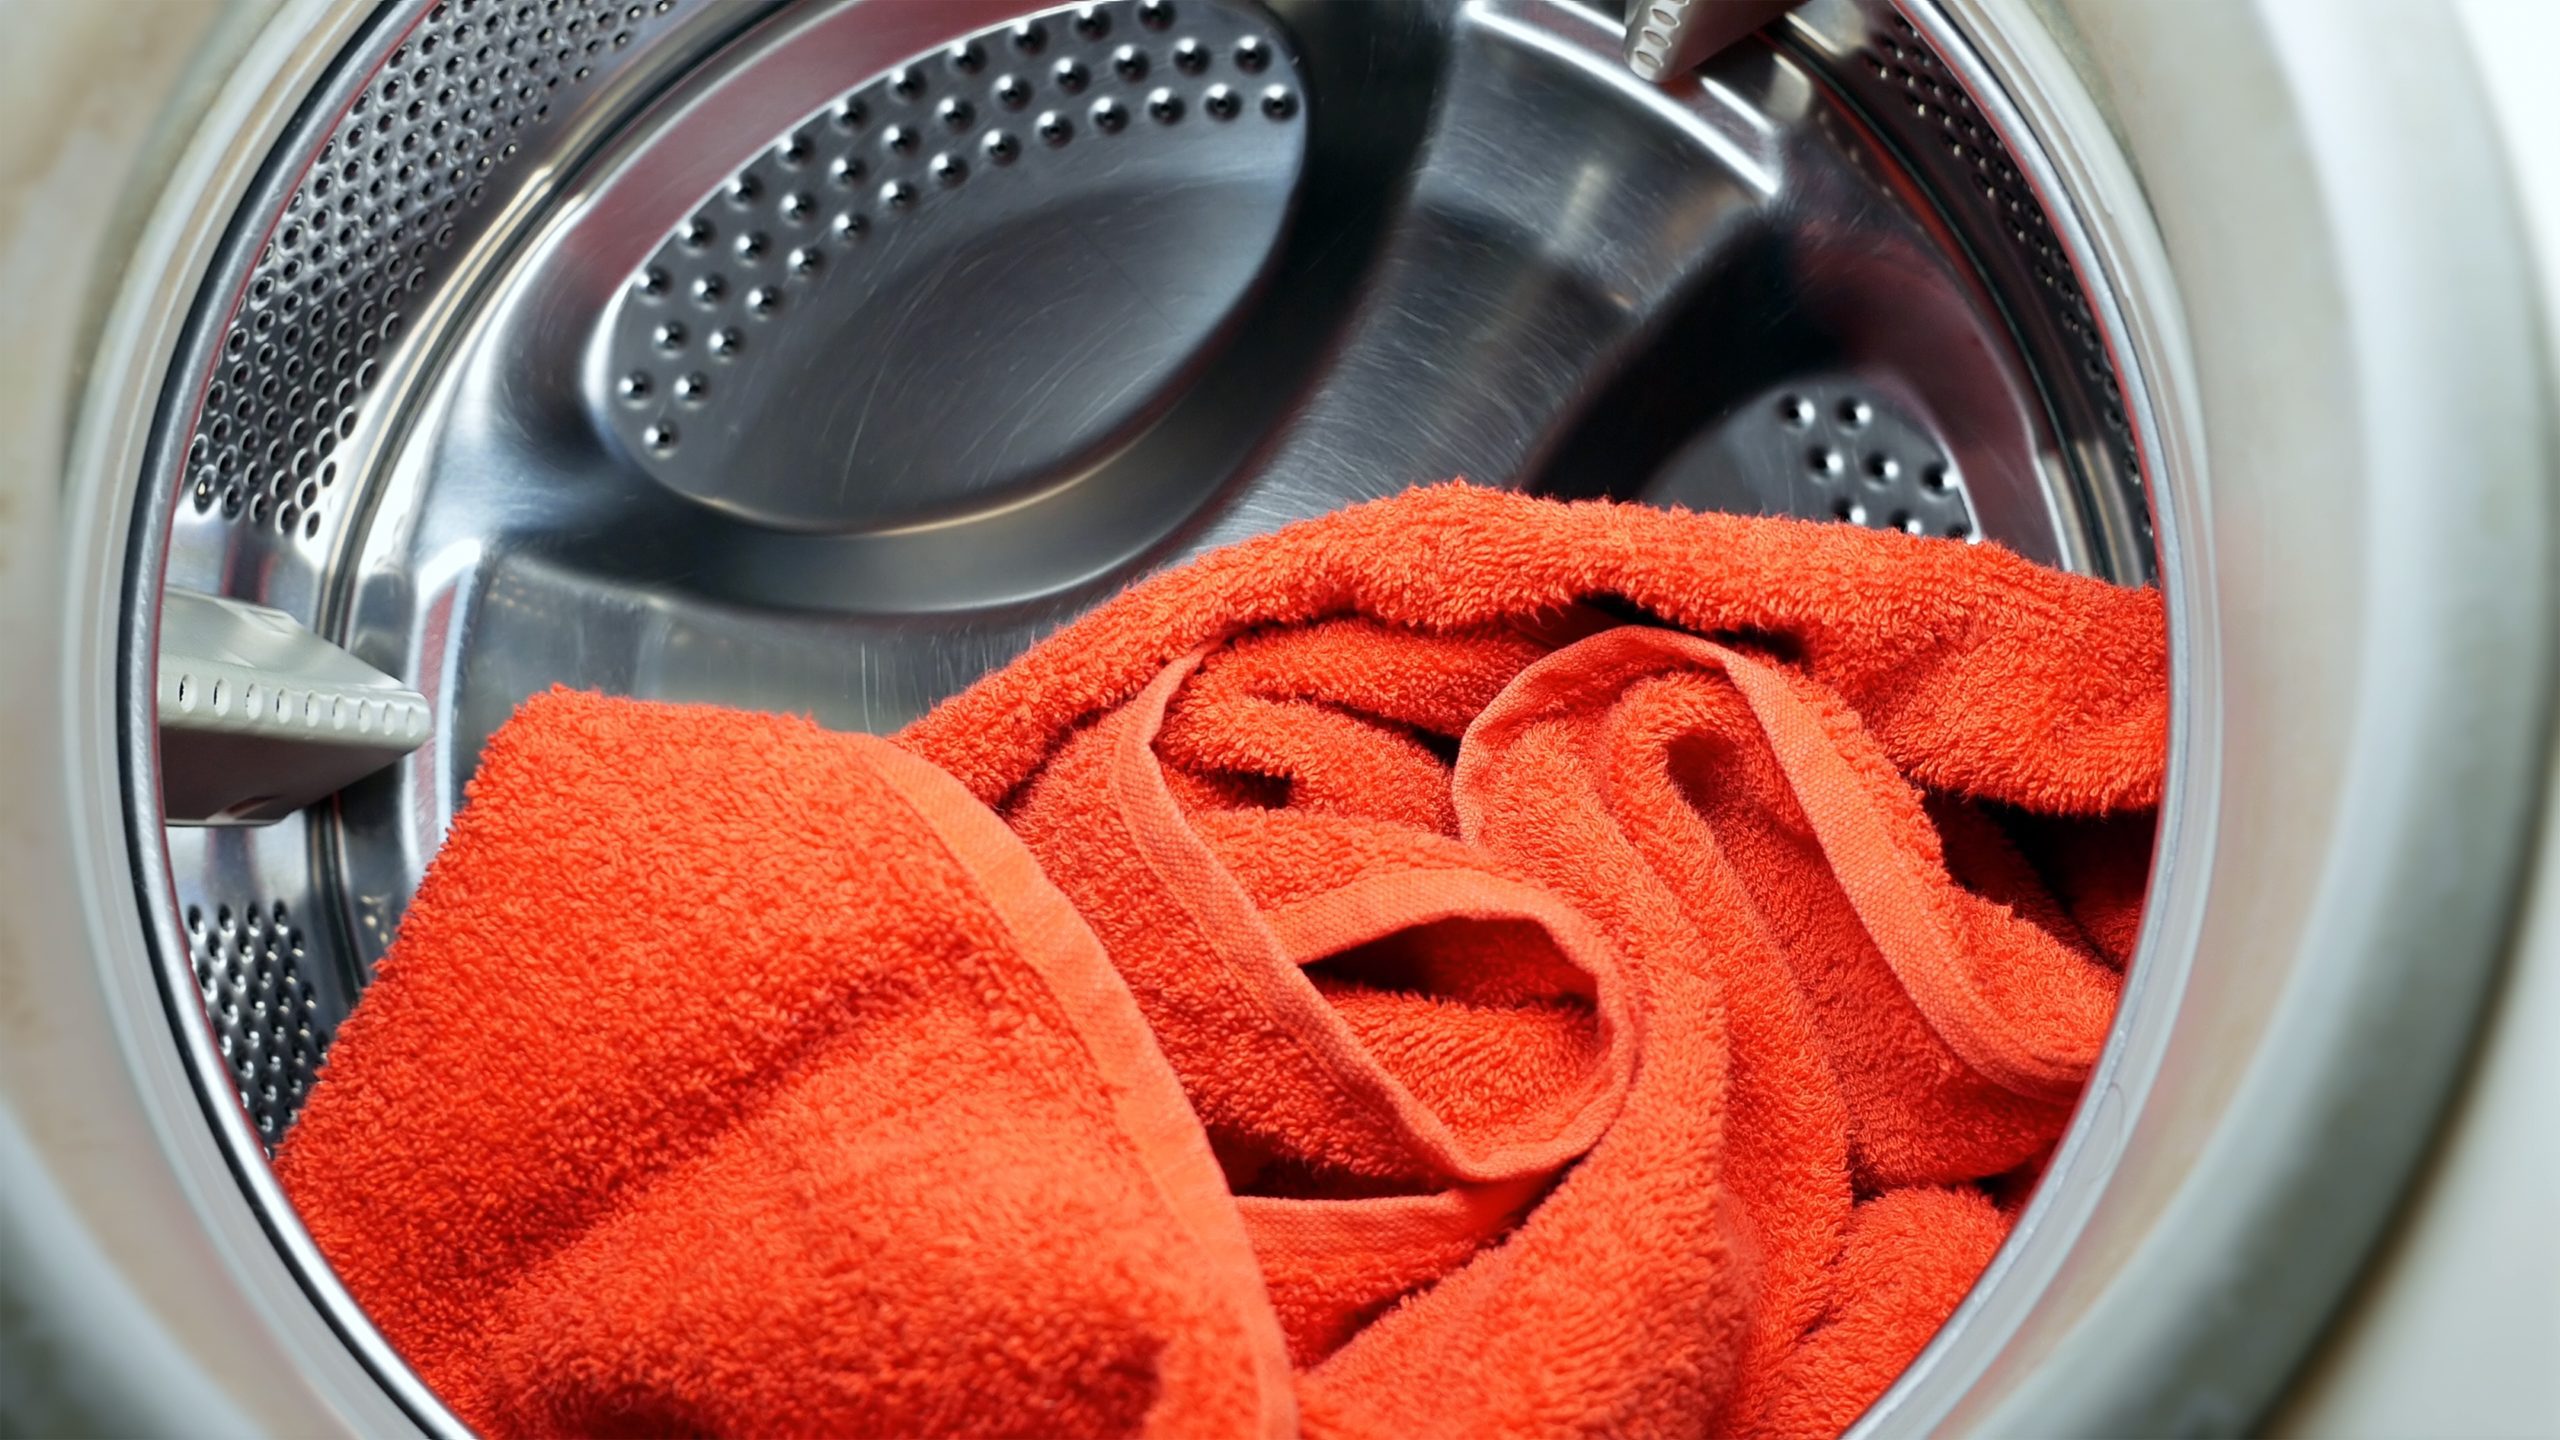 Washing or drying machine with red towel in a laundry. Household equipment and cleanliness hygiene housework concept.